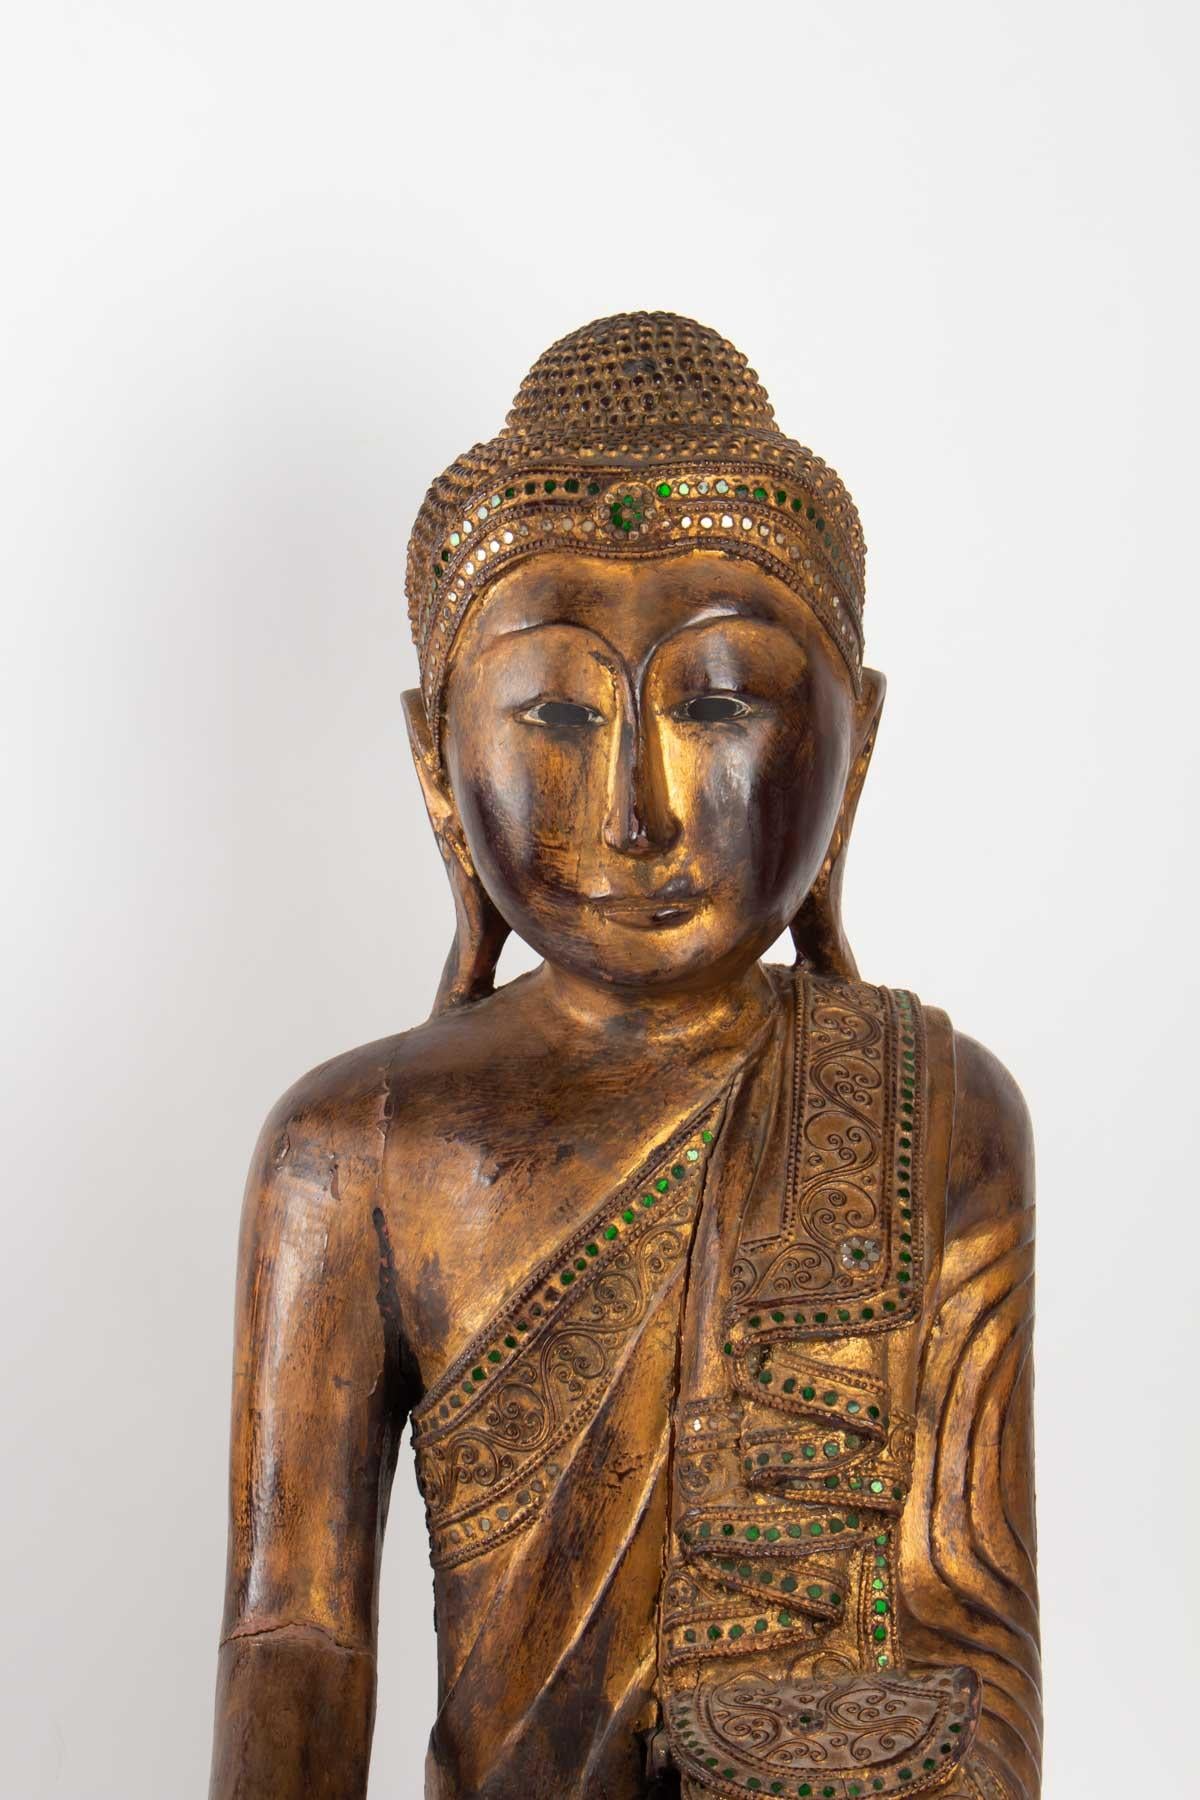 Wooden Buddha carved Thailand, mid-20th century, slot in the wood above the hand and under the elbow. Green and white mirror inlay.
Measures: H 70cm, W 57cm, W 37cm.